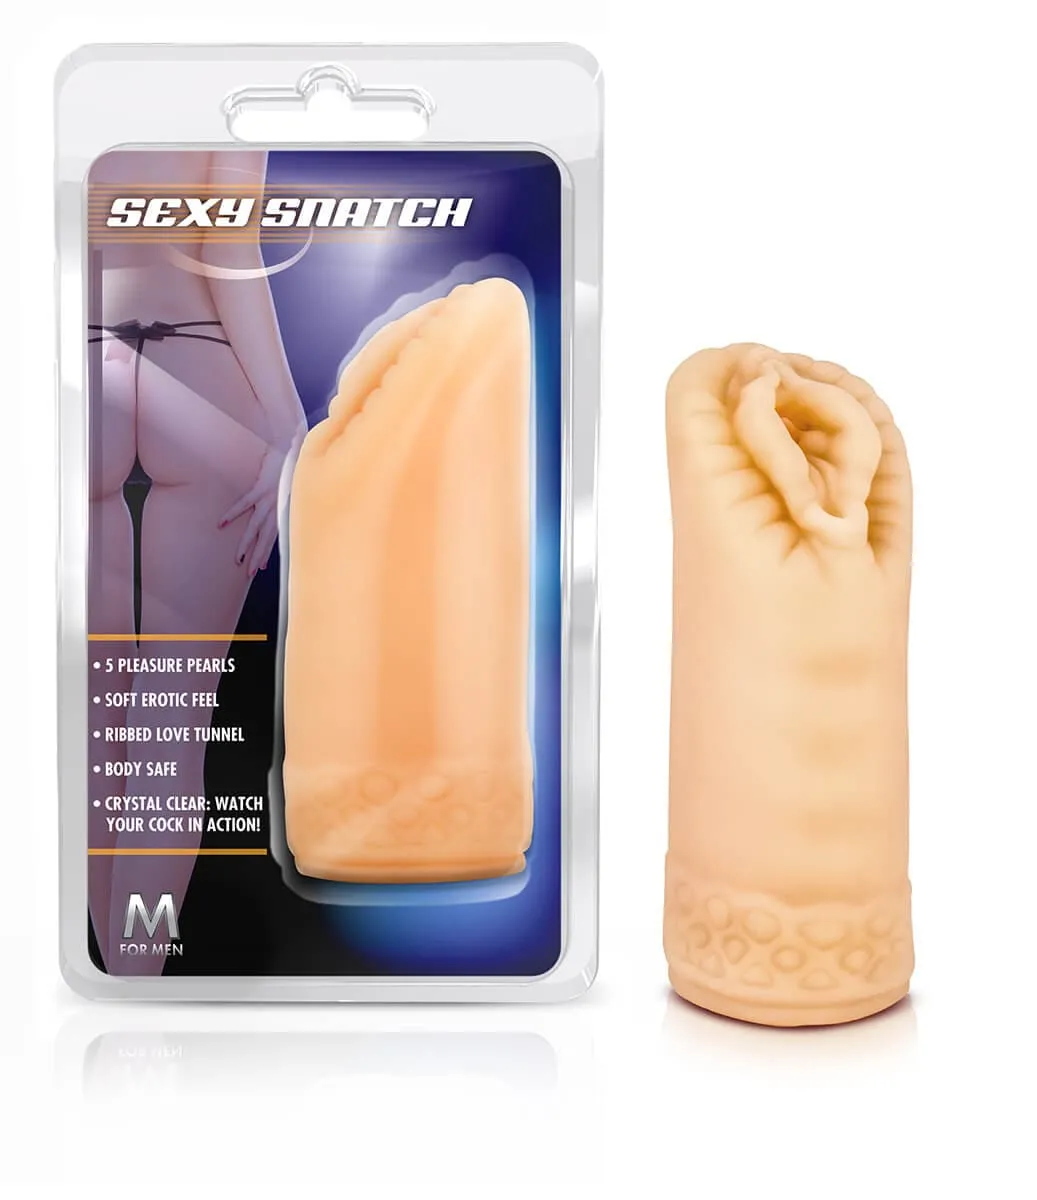 BL-06423 M for Men-Sexy Snatch-Natural